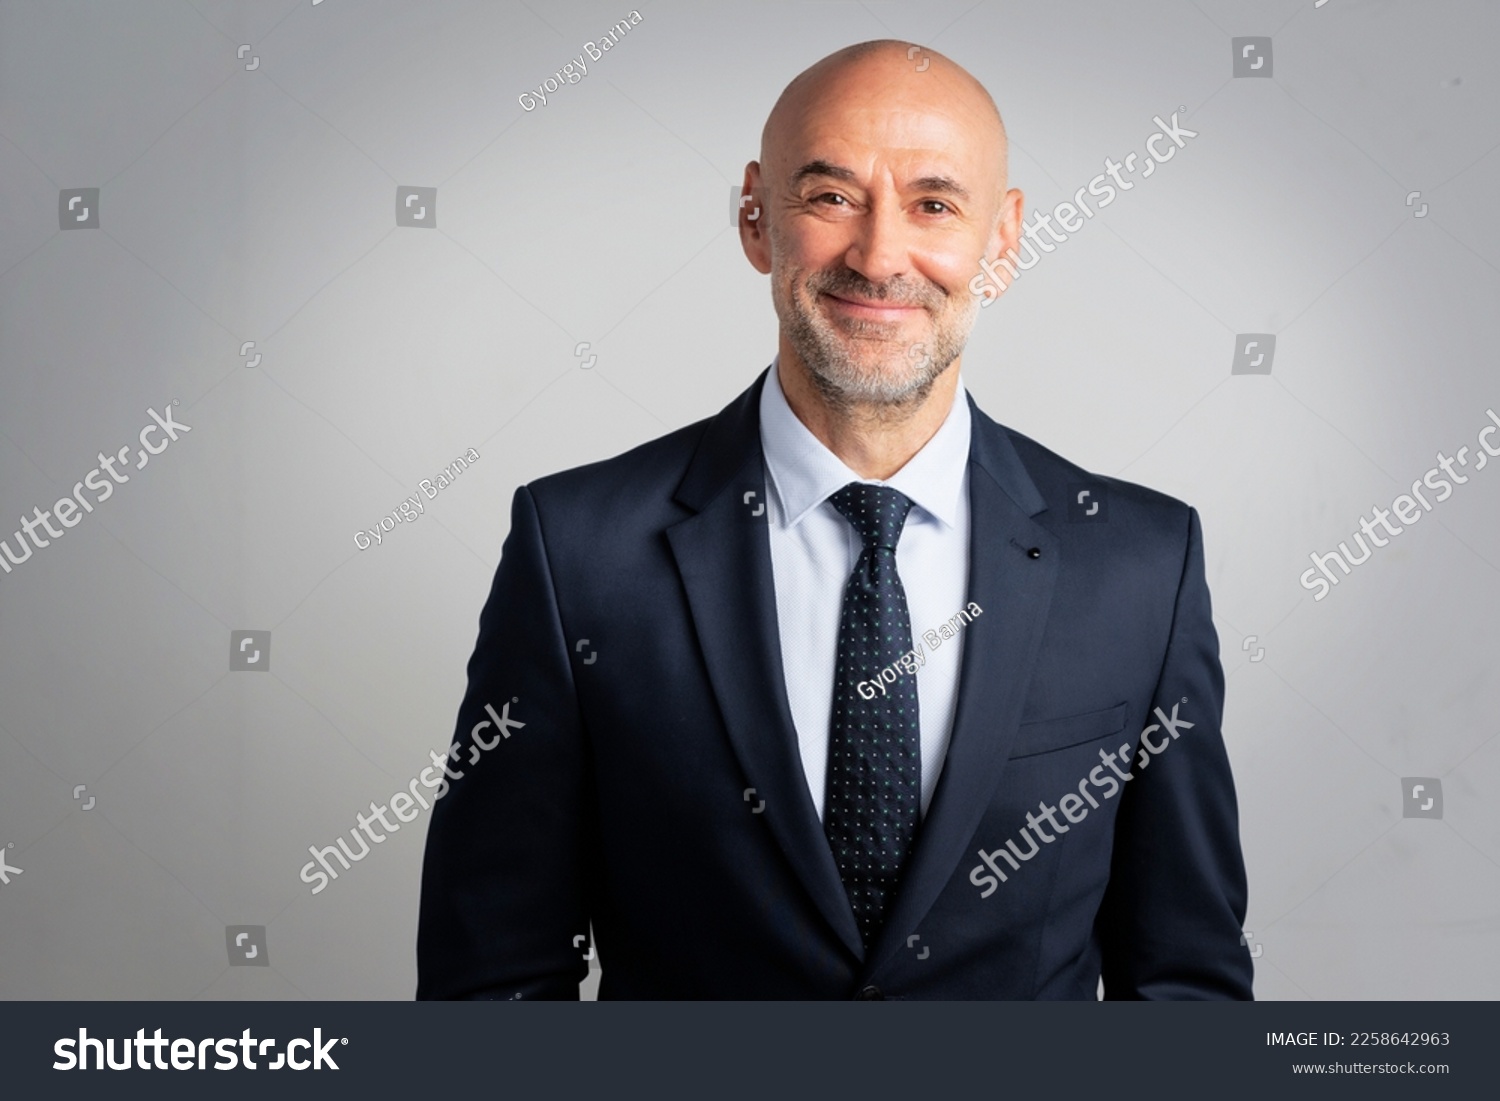 Portrait of caucasian business man looking at camera and smiling. Confident mature male professional is in suit. He is against gray background. #2258642963